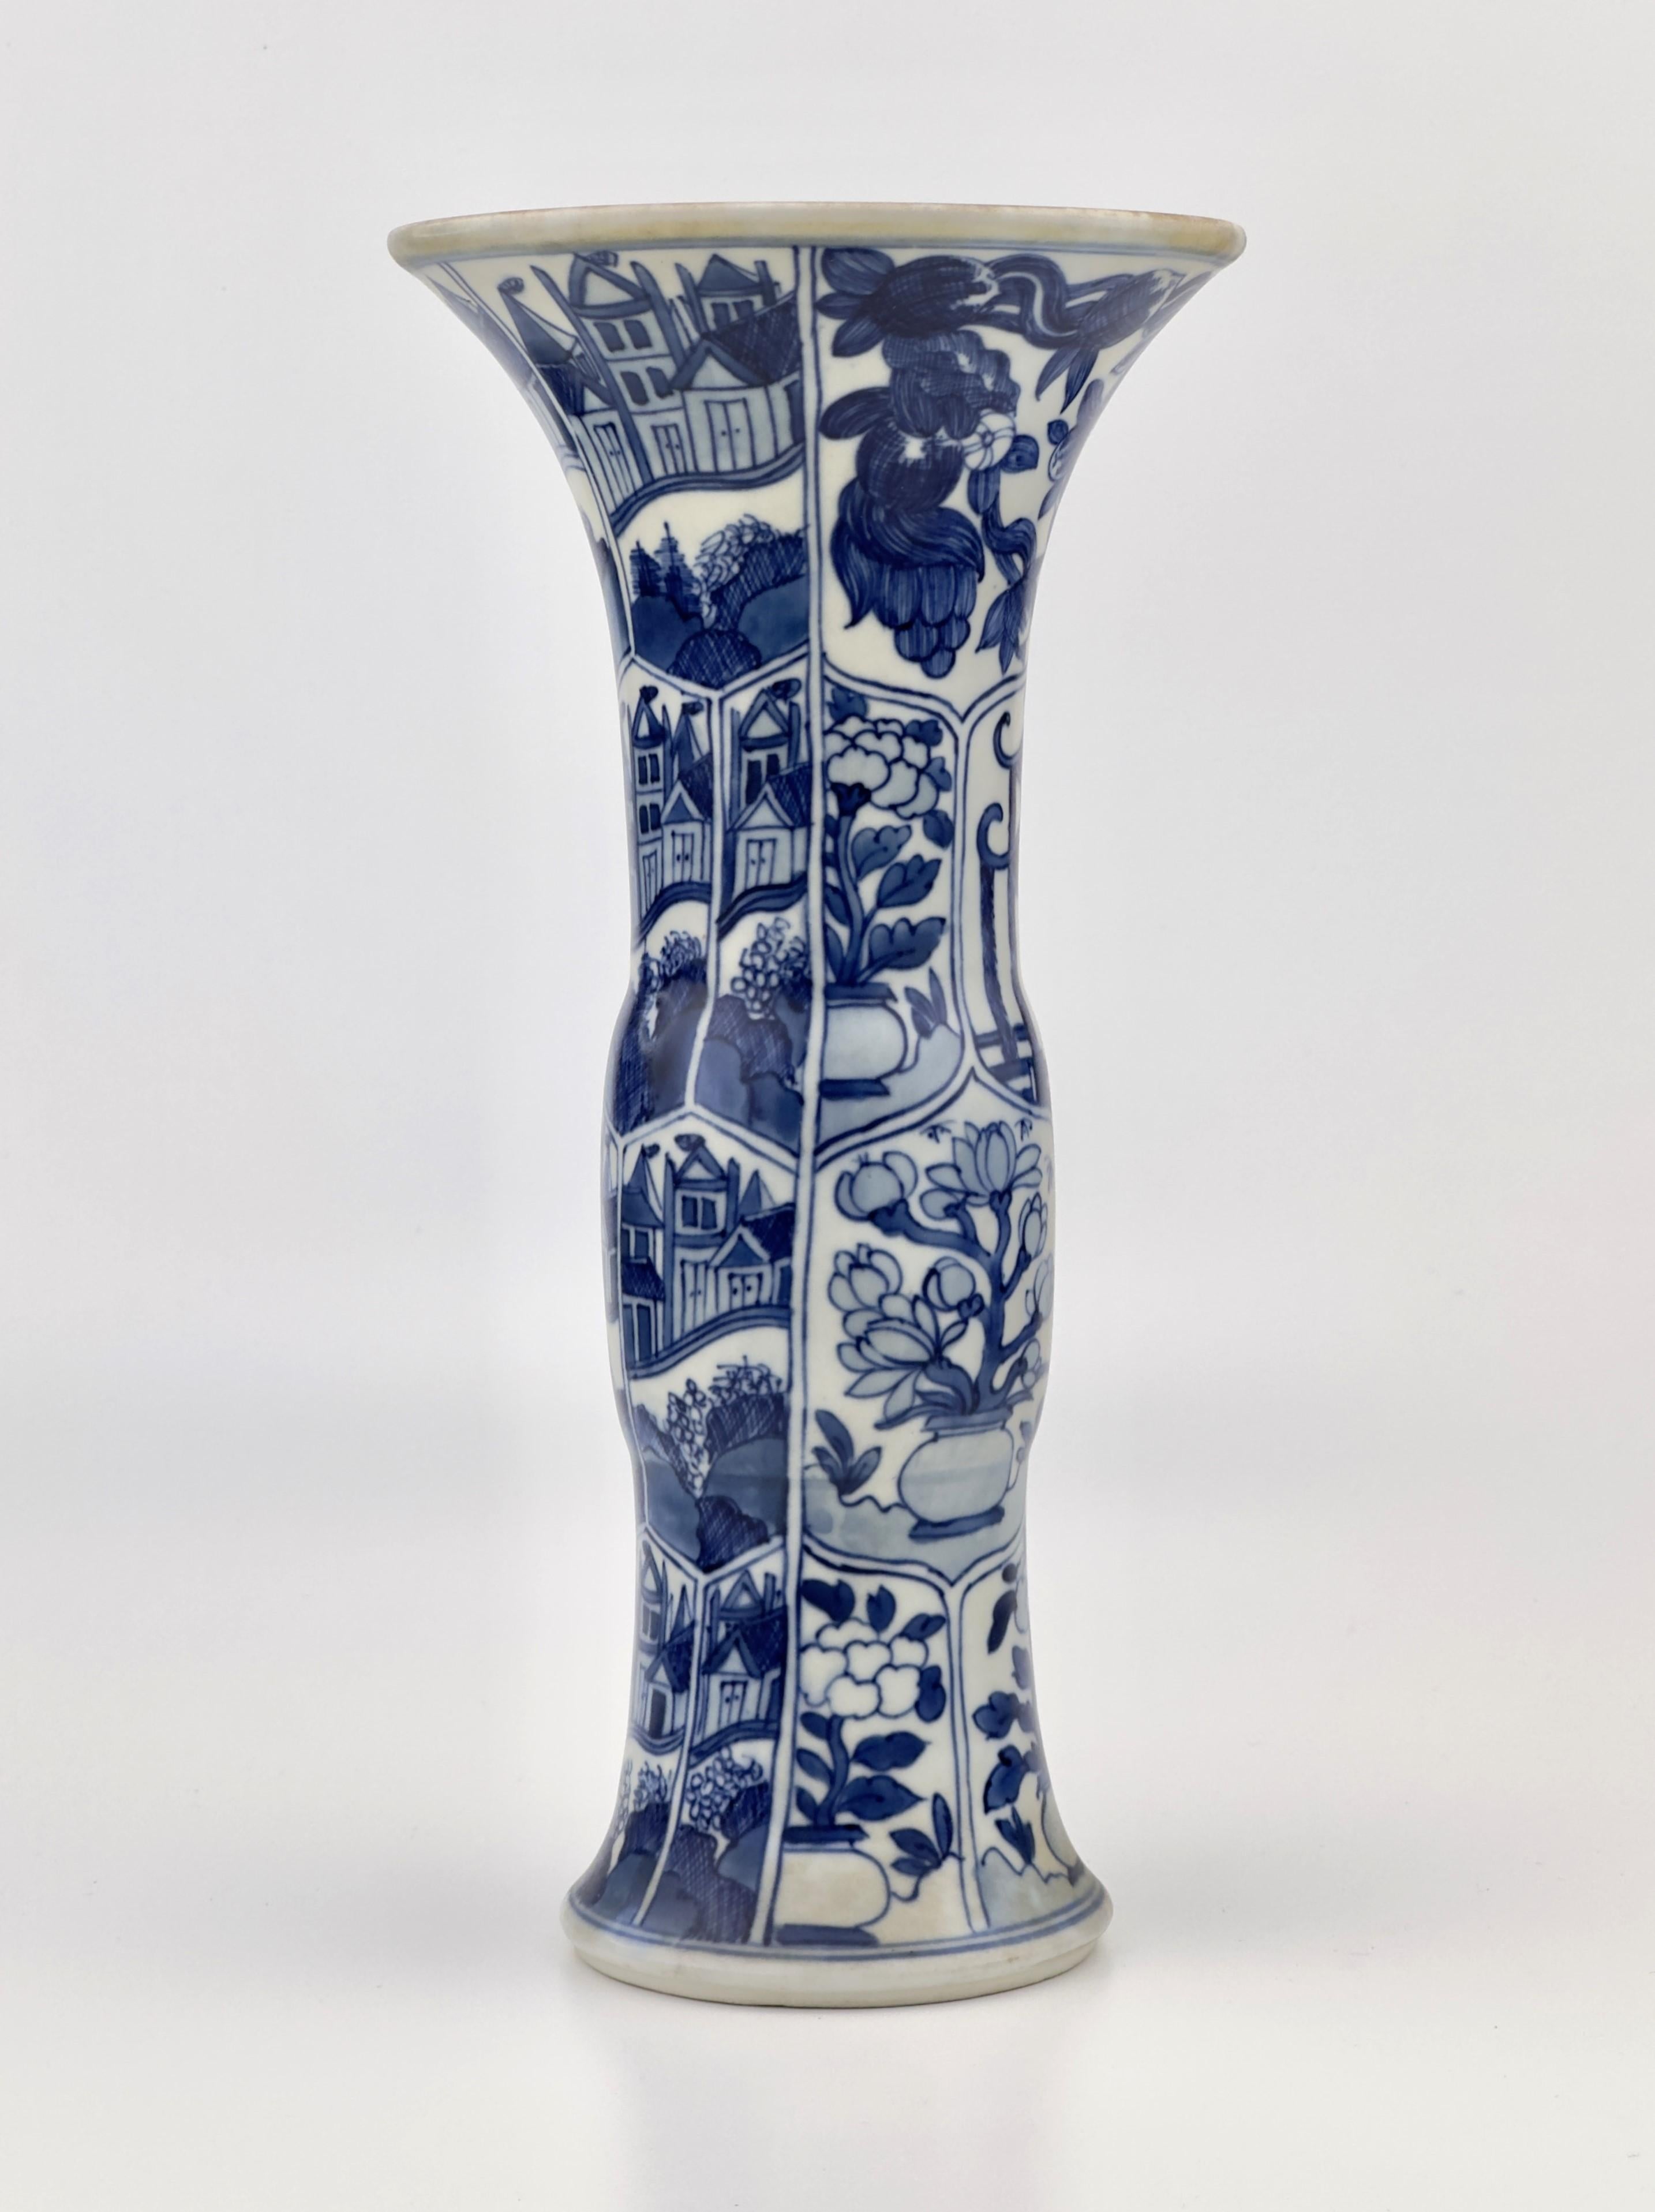 This vase is decorated with dutch canal houses on one side and Chinese pagodas and flowers on the other side. Eastern and Western motifs were simultaneously expressed in ceramics.

Period : Qing Dynasty, Kangxi Period
Production Date :